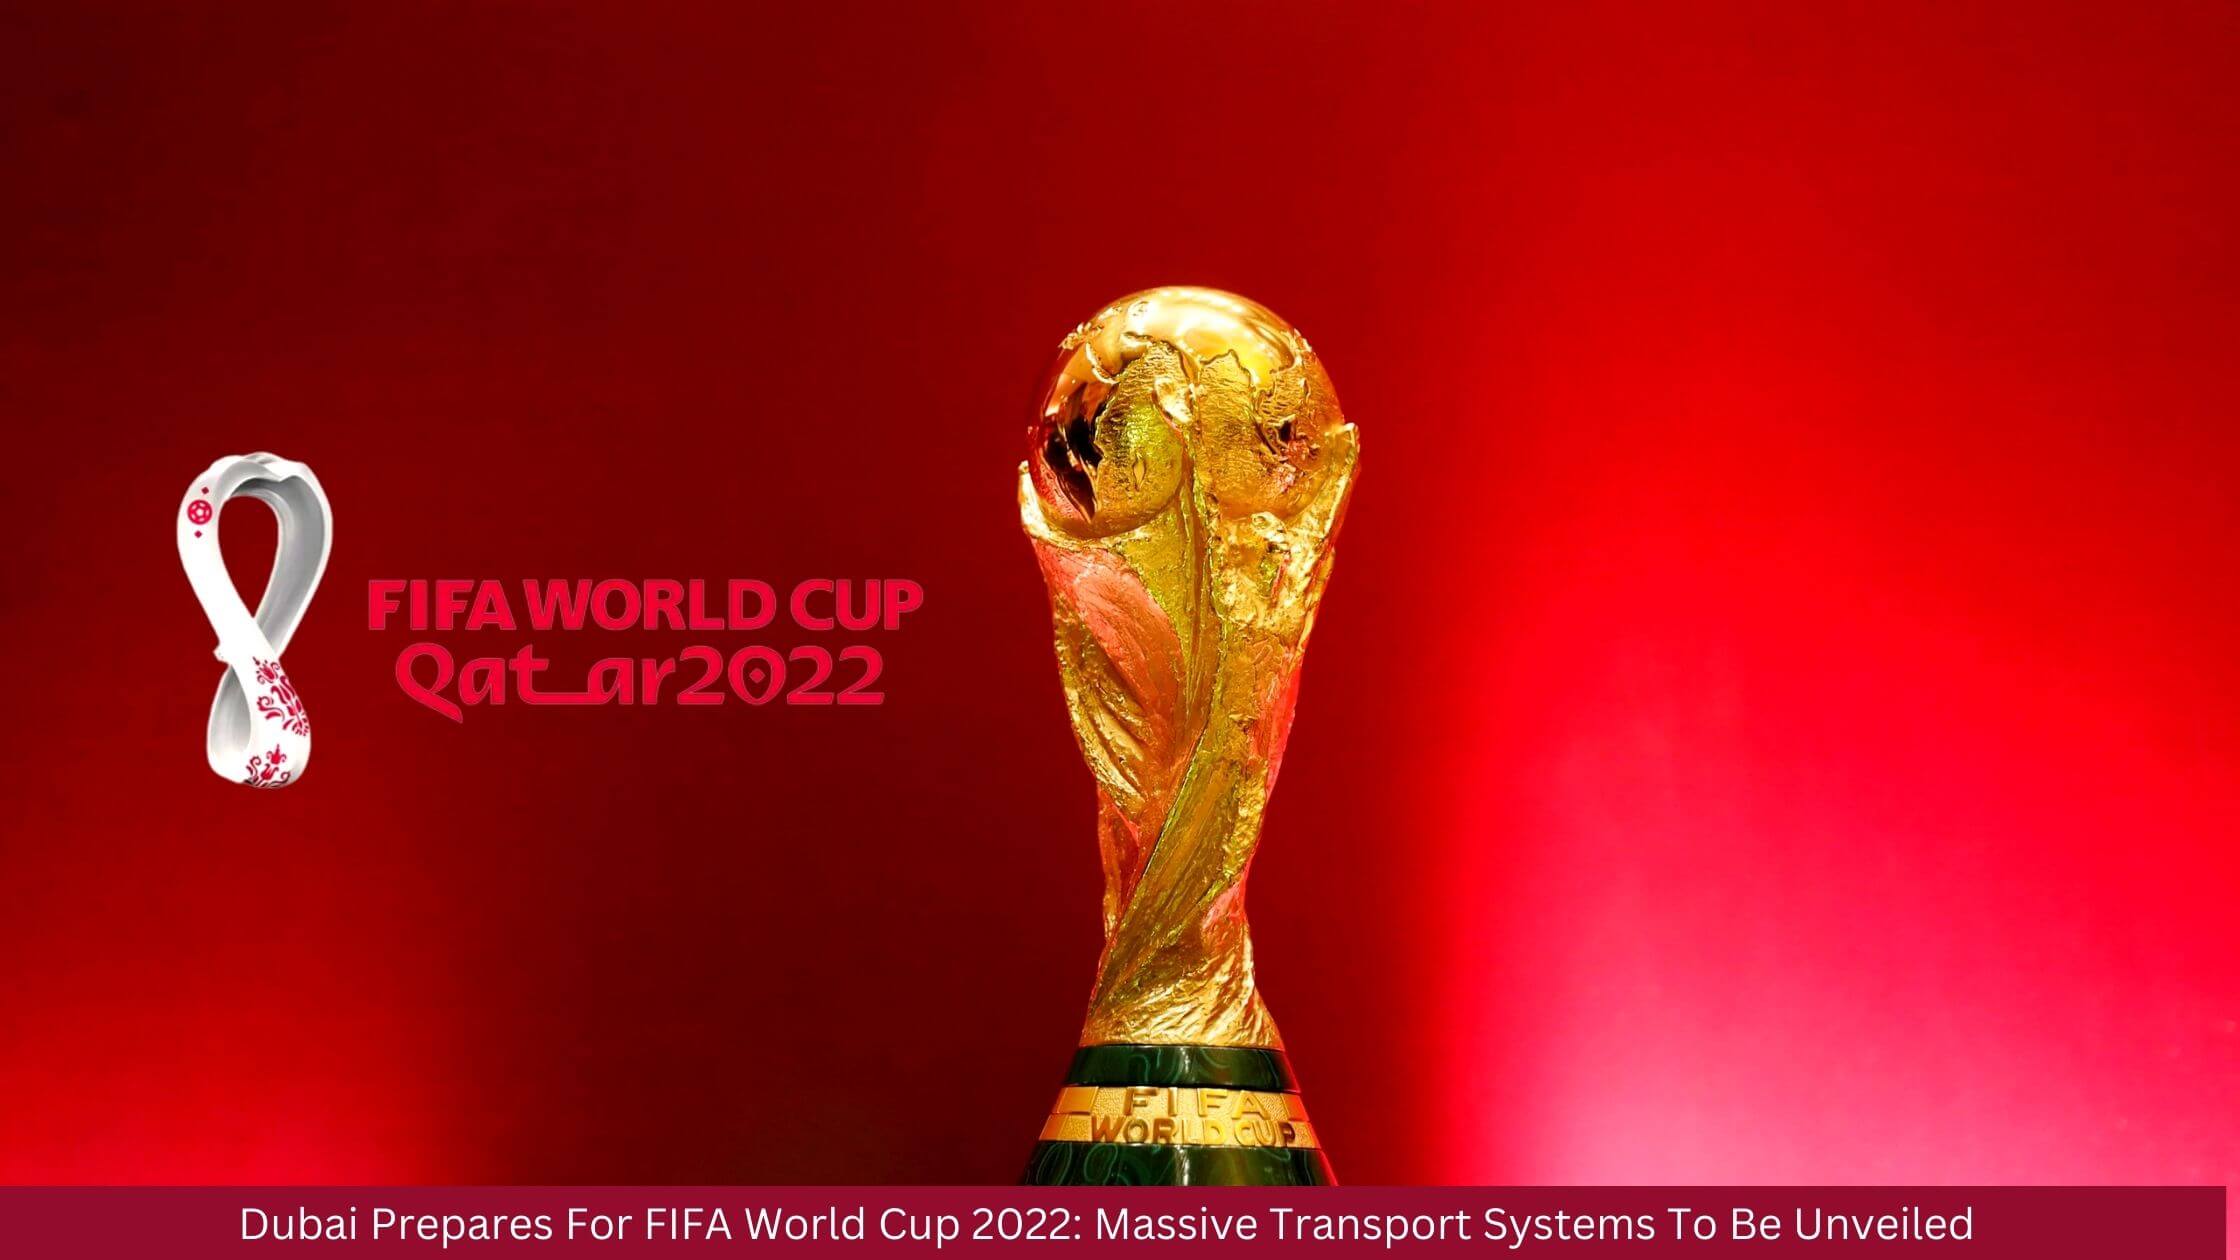 Dubai Prepares For FIFA World Cup 2022 Massive Transport Systems To Be Unveiled